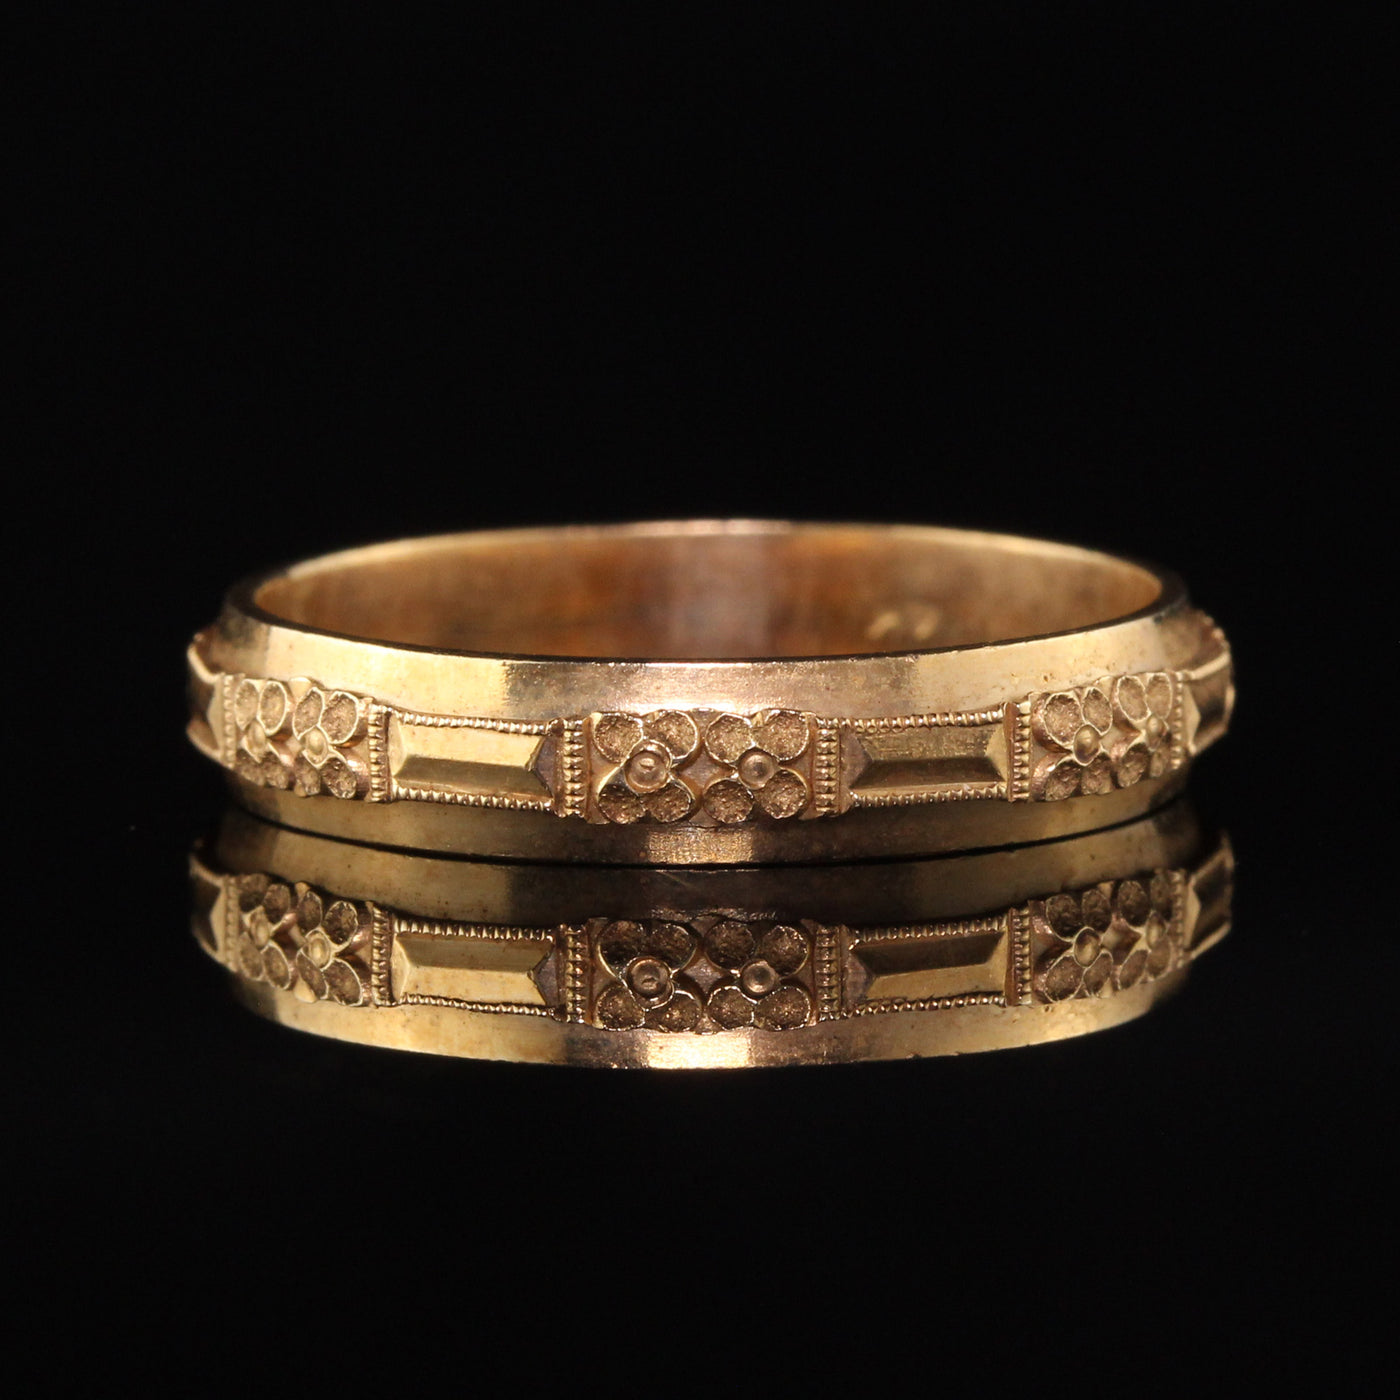 Antique Art Deco 14K Yellow Gold Engraved Wedding Band - Size 9 1/4